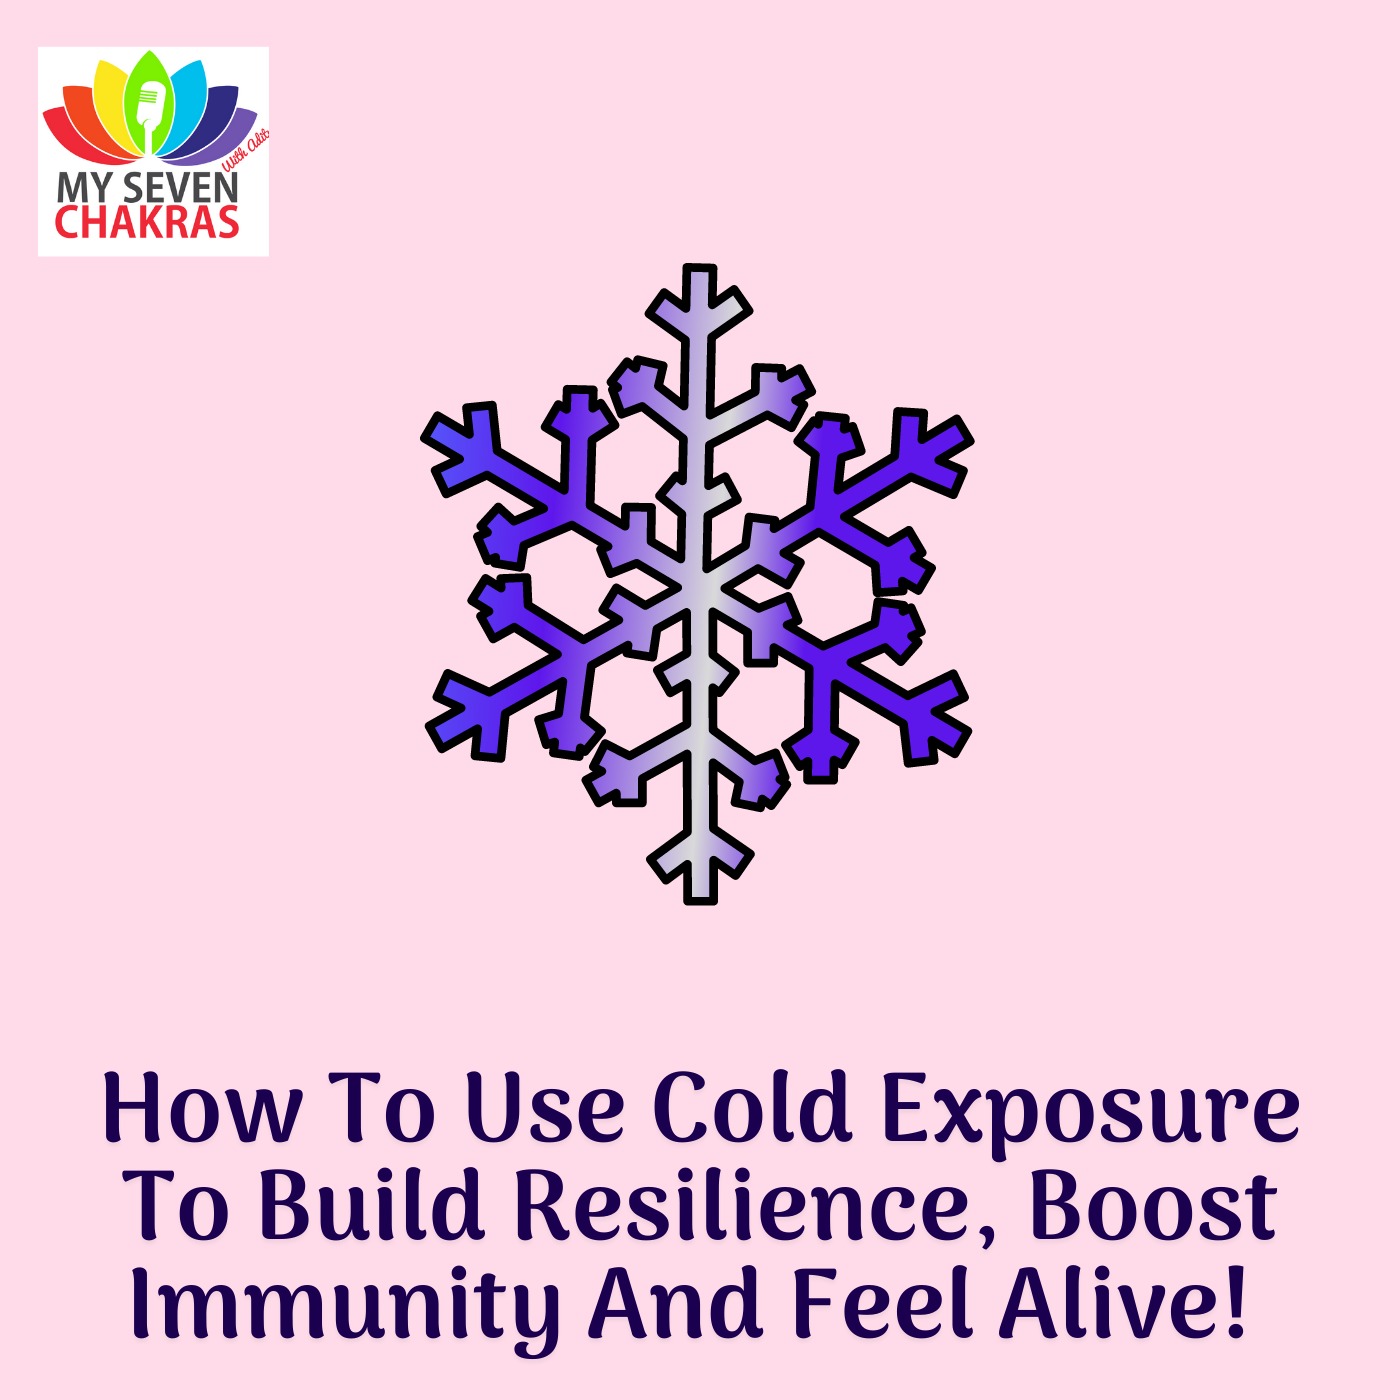 How To Use Cold Exposure To Build Resilience, Boost Immunity And Feel Alive!